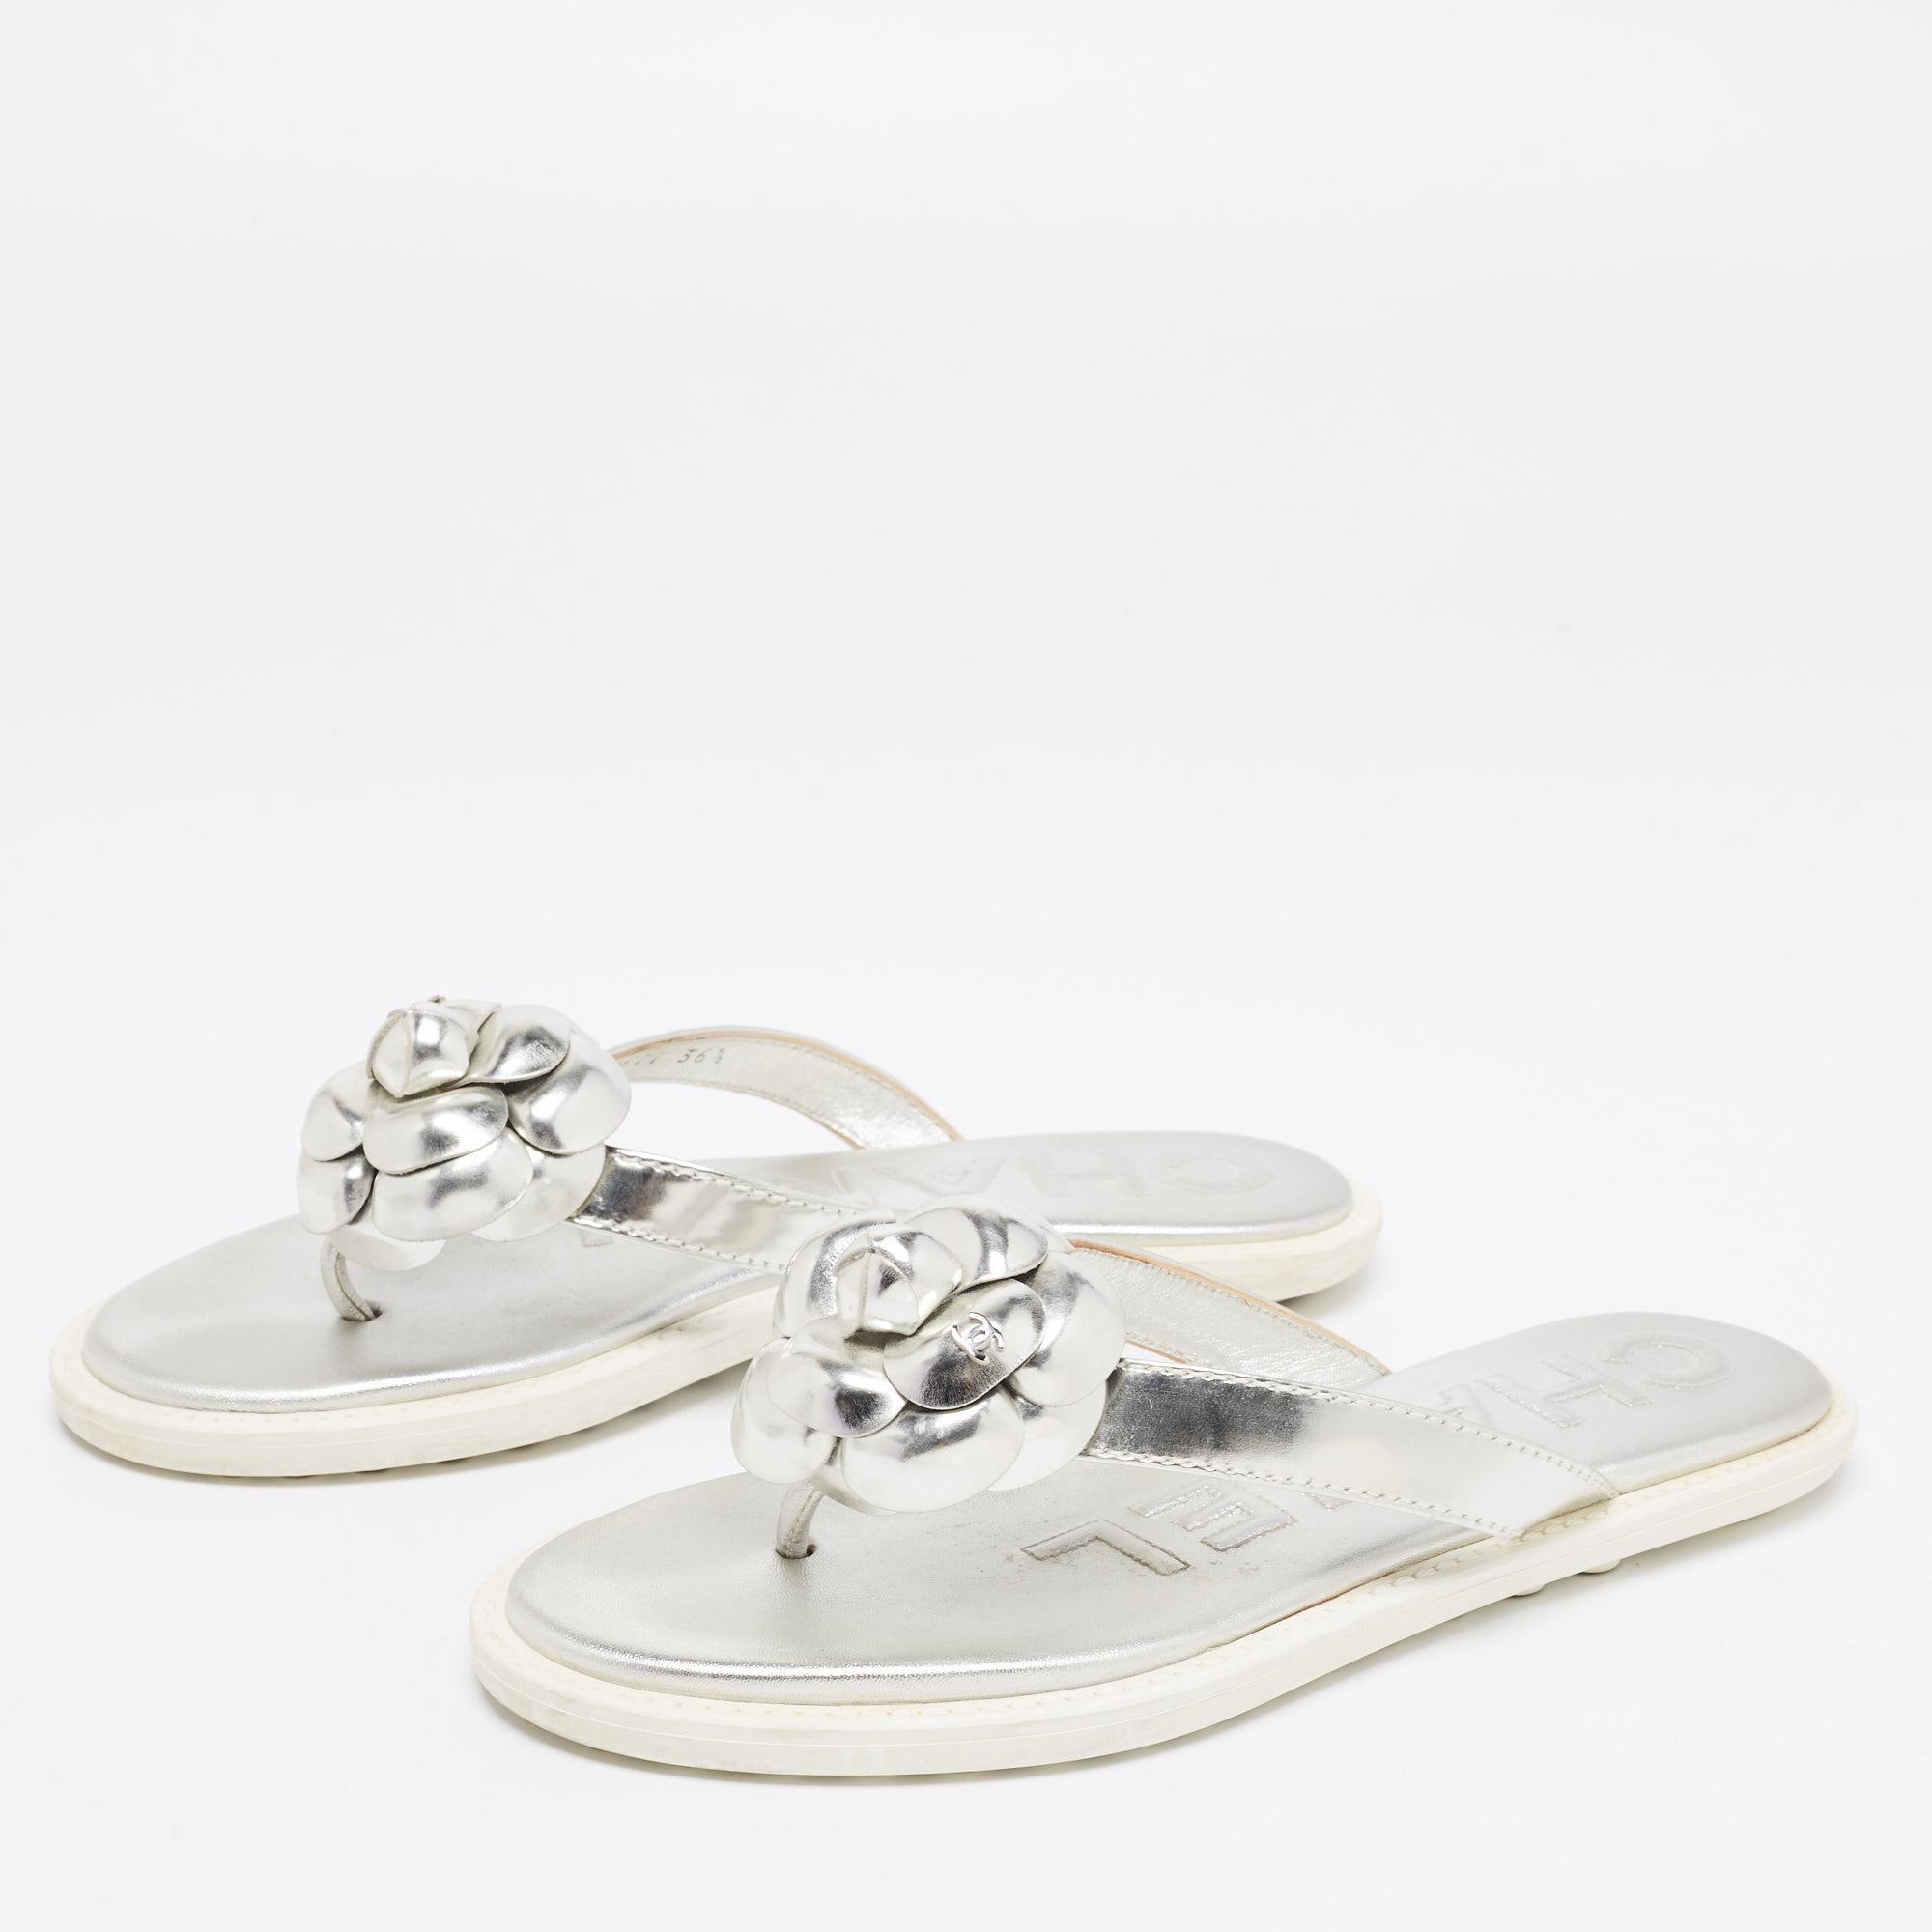 A classic pair of flat thong sandals is a must-have in every collection and when the design is by Chanel, it is sure to add a statement of luxury to the summer wardrobe. These thong flats for women are constructed using silver leather and detailed